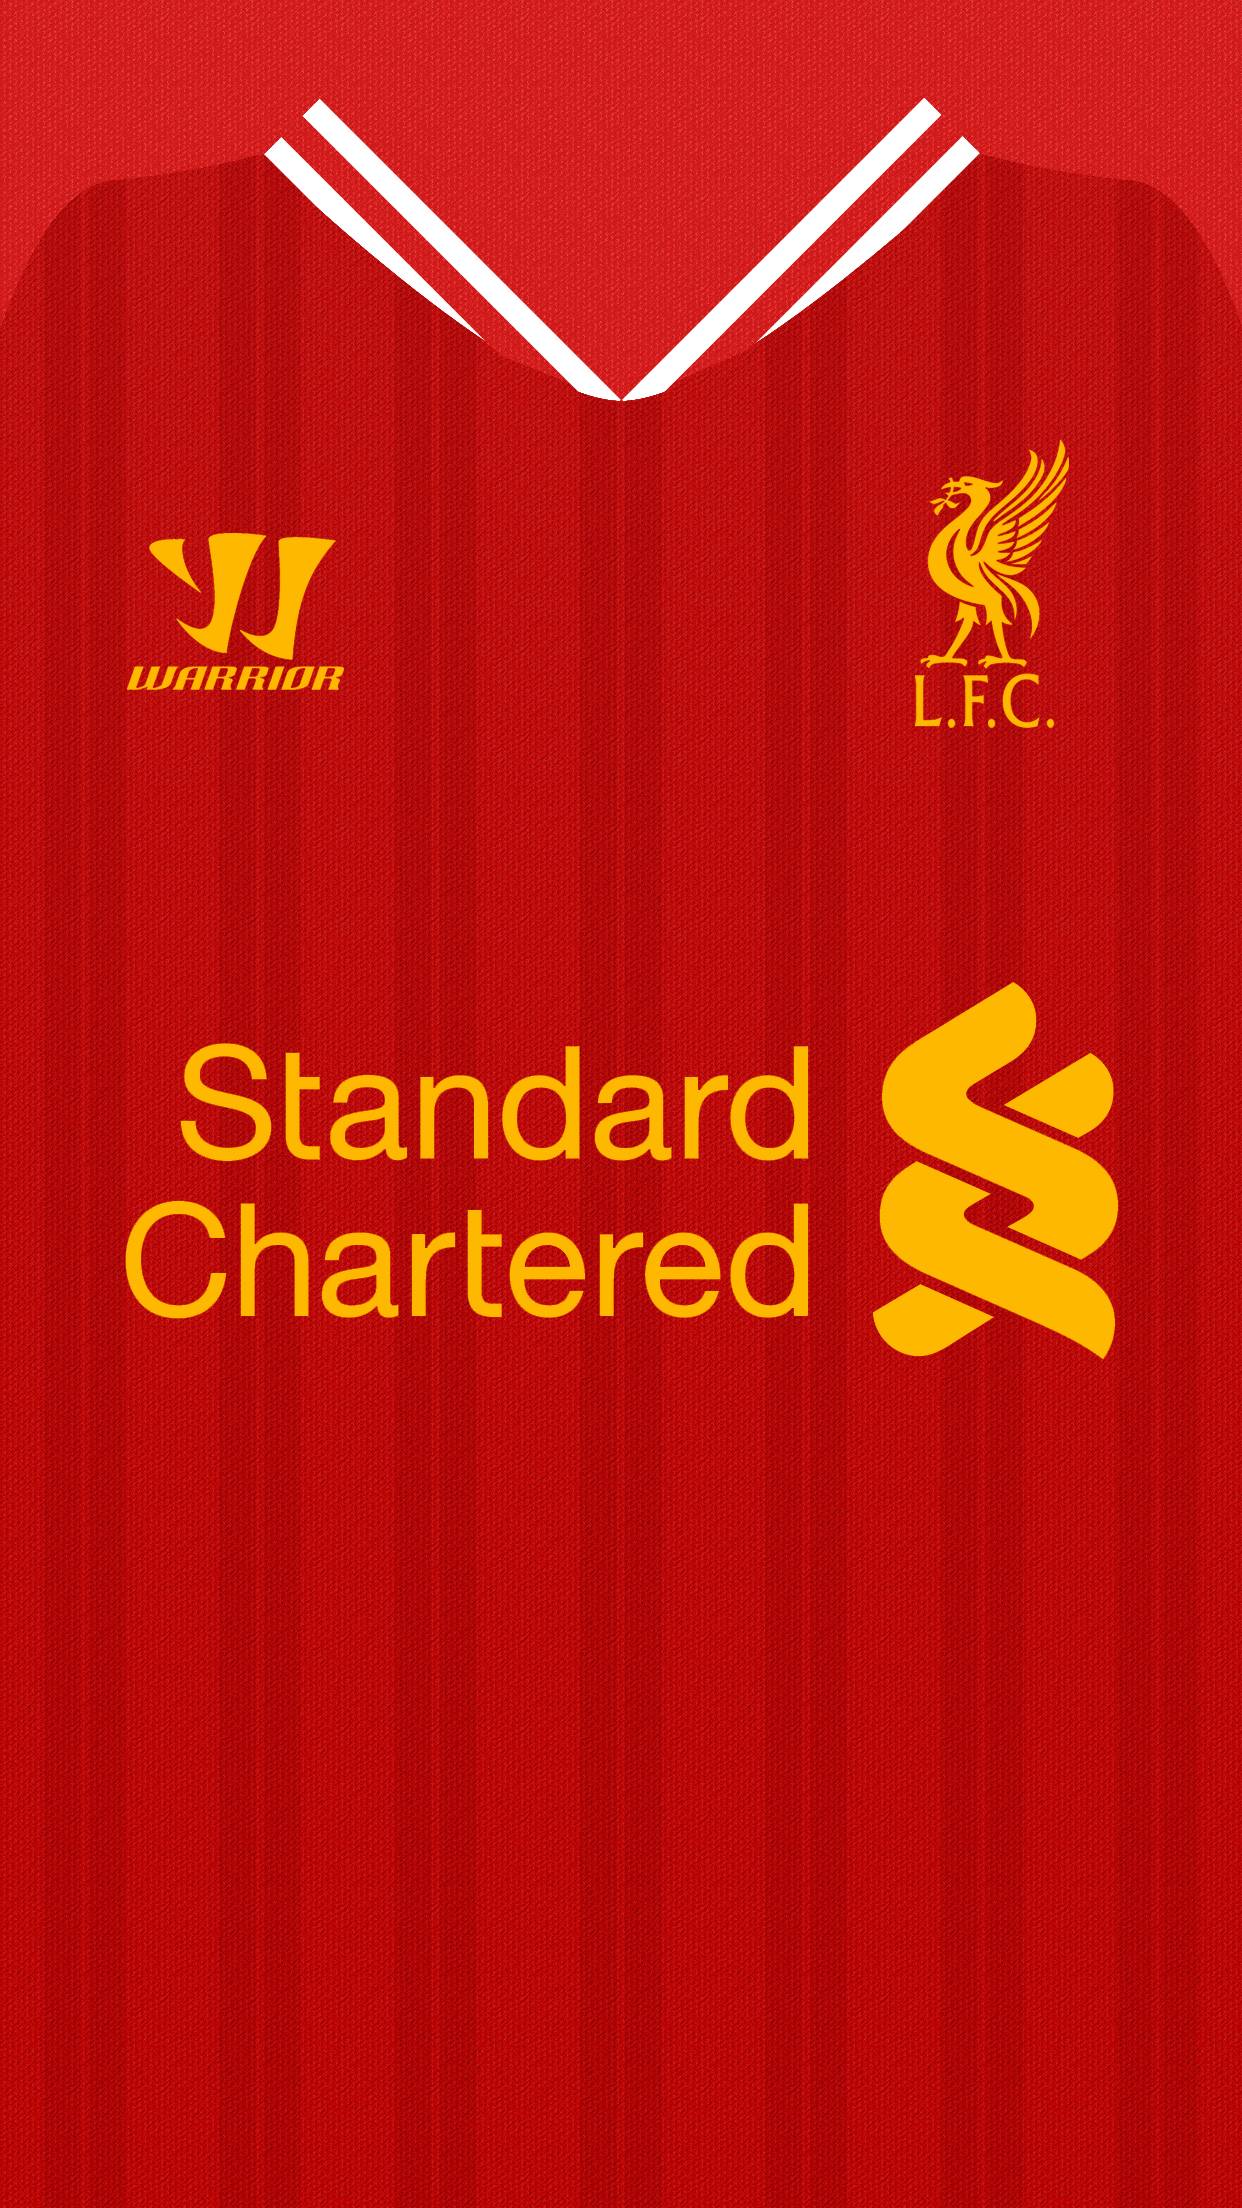 I&;m not a liverpool fan, but I made this mobile wallpaper for a